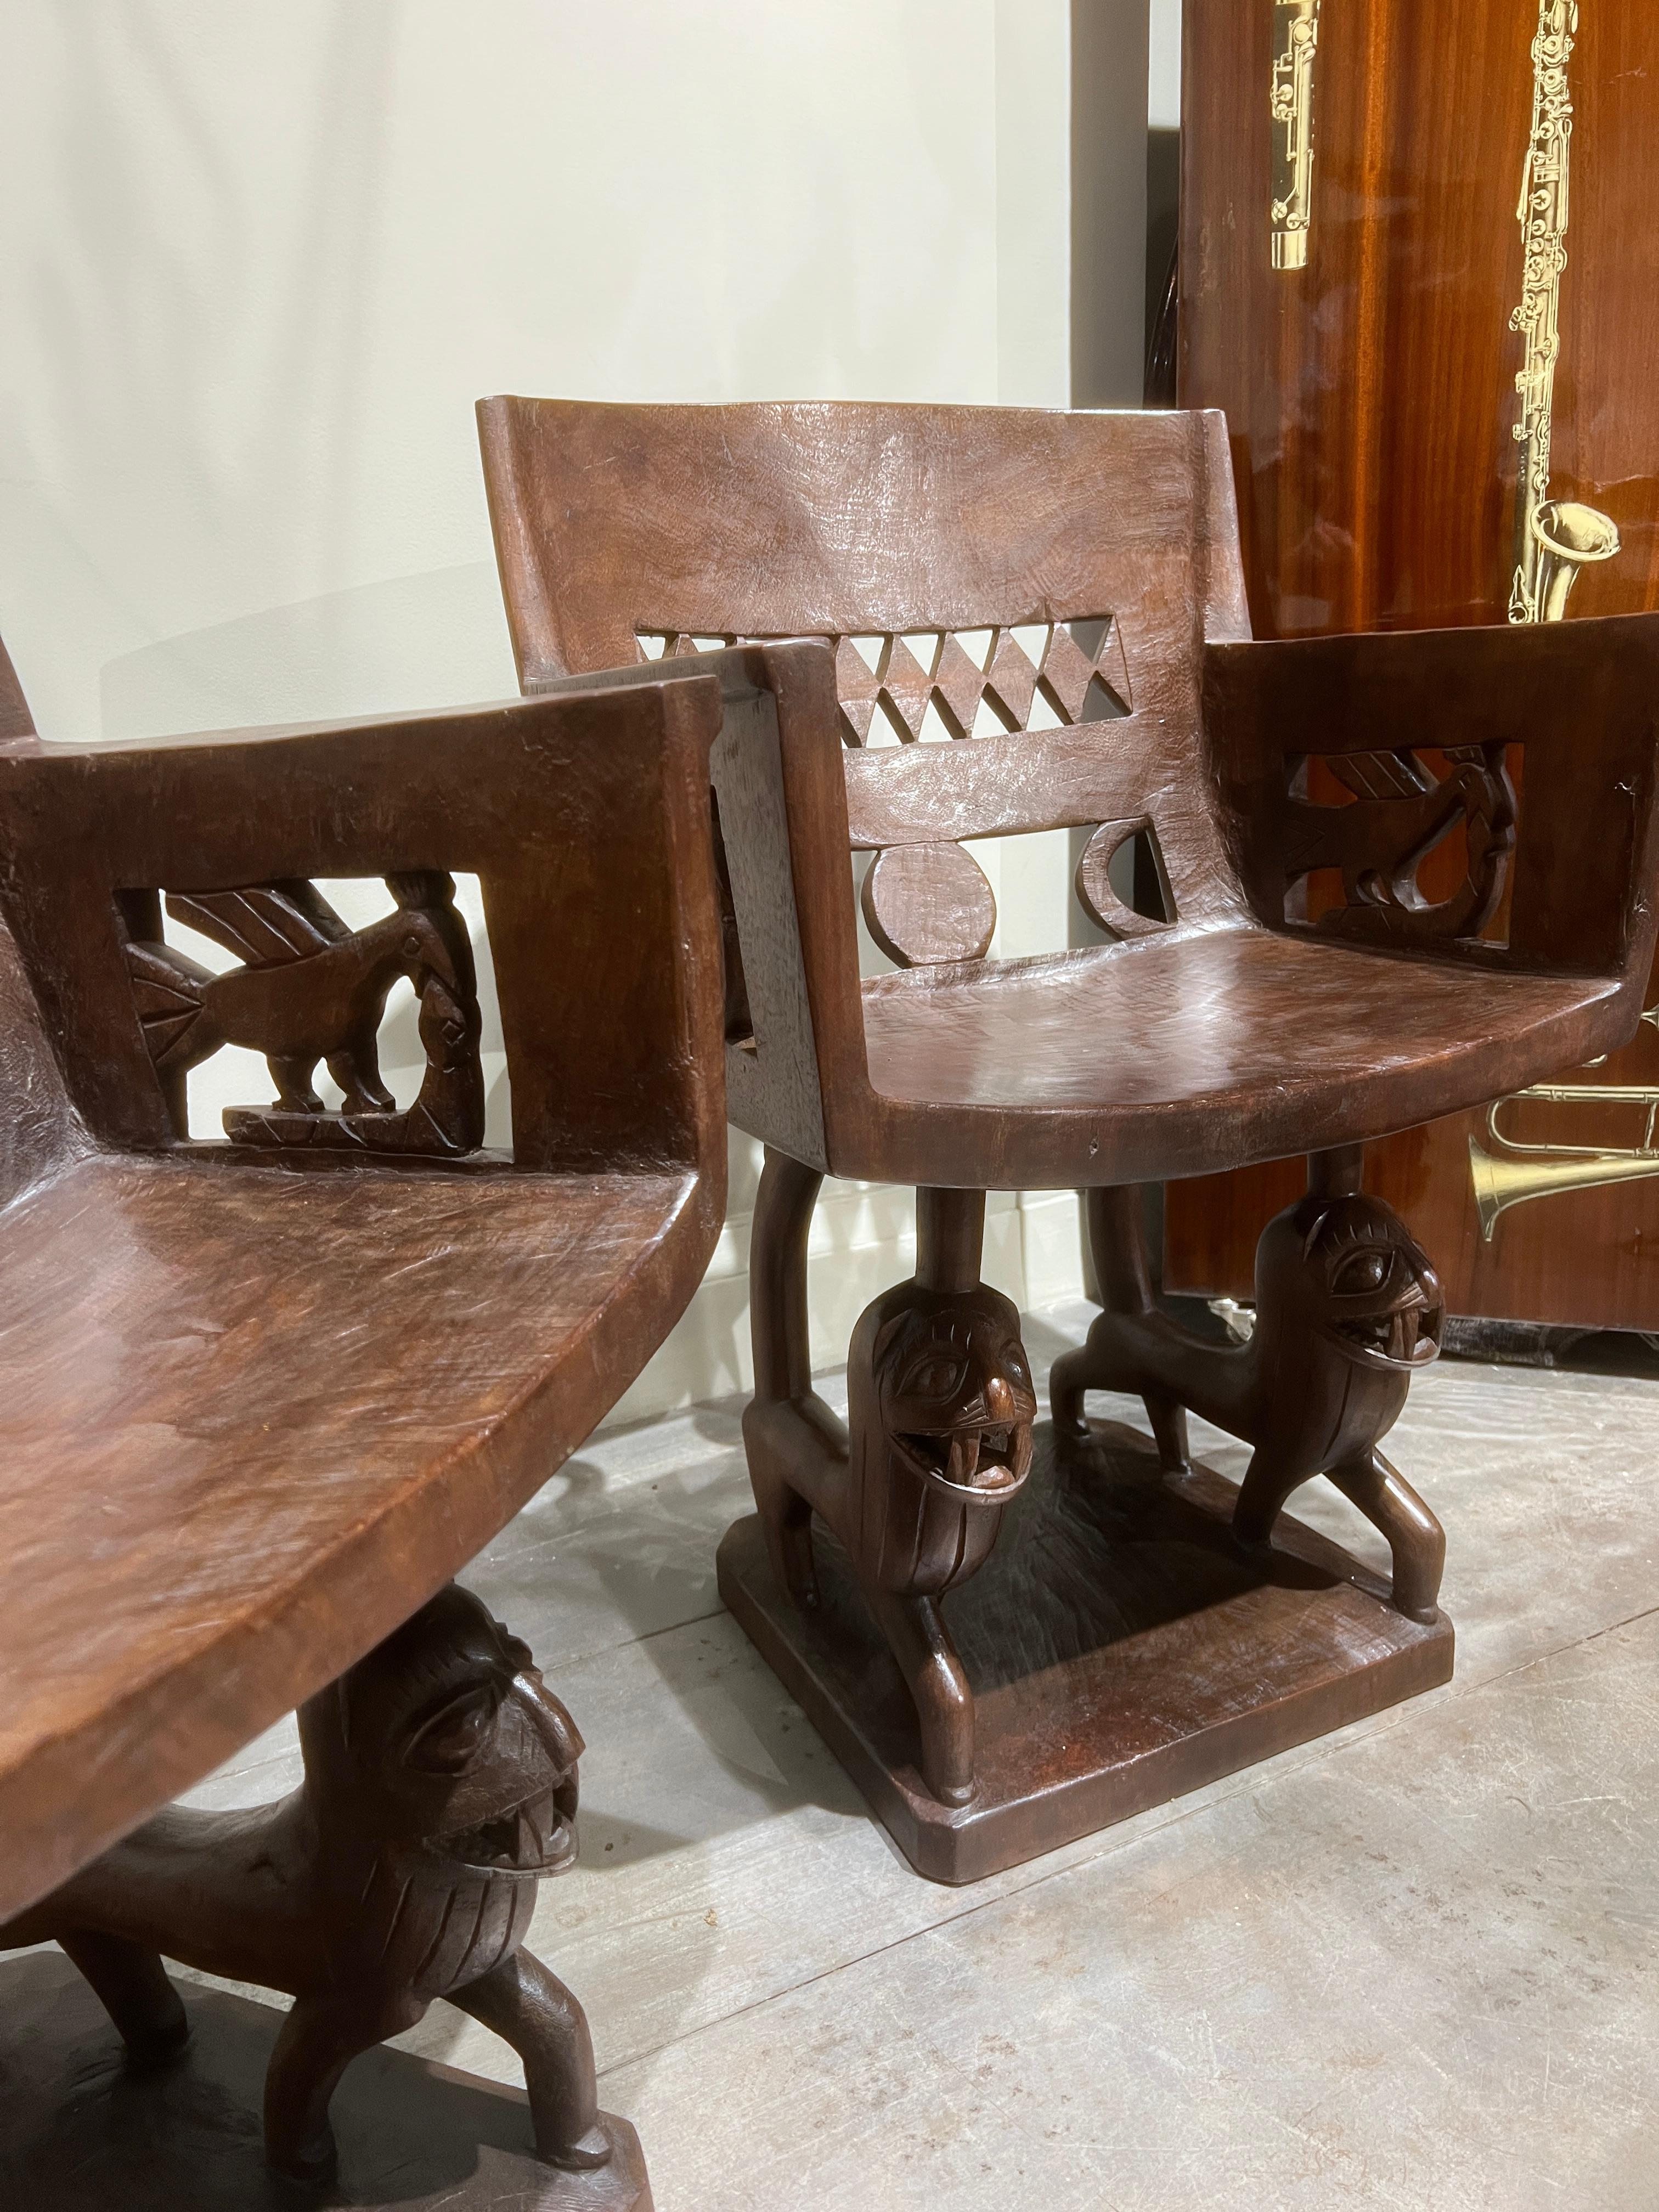 Primitive Pair of Wooden African Armchairs circa 1900 from the Dahomey Kingdom